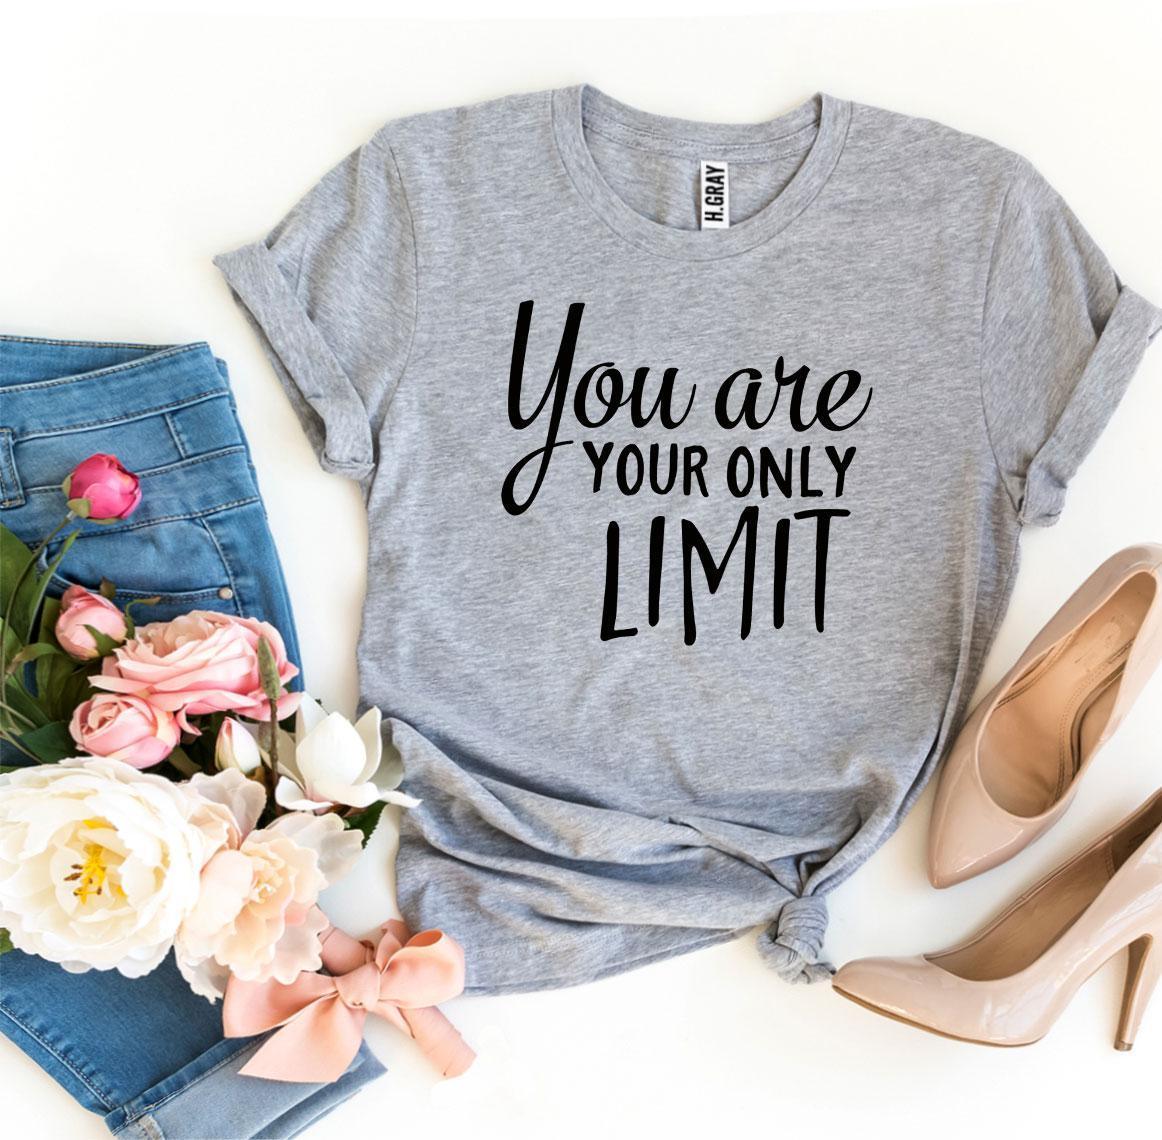 You Are Your Only Limit T-shirt - VirtuousWares:Global